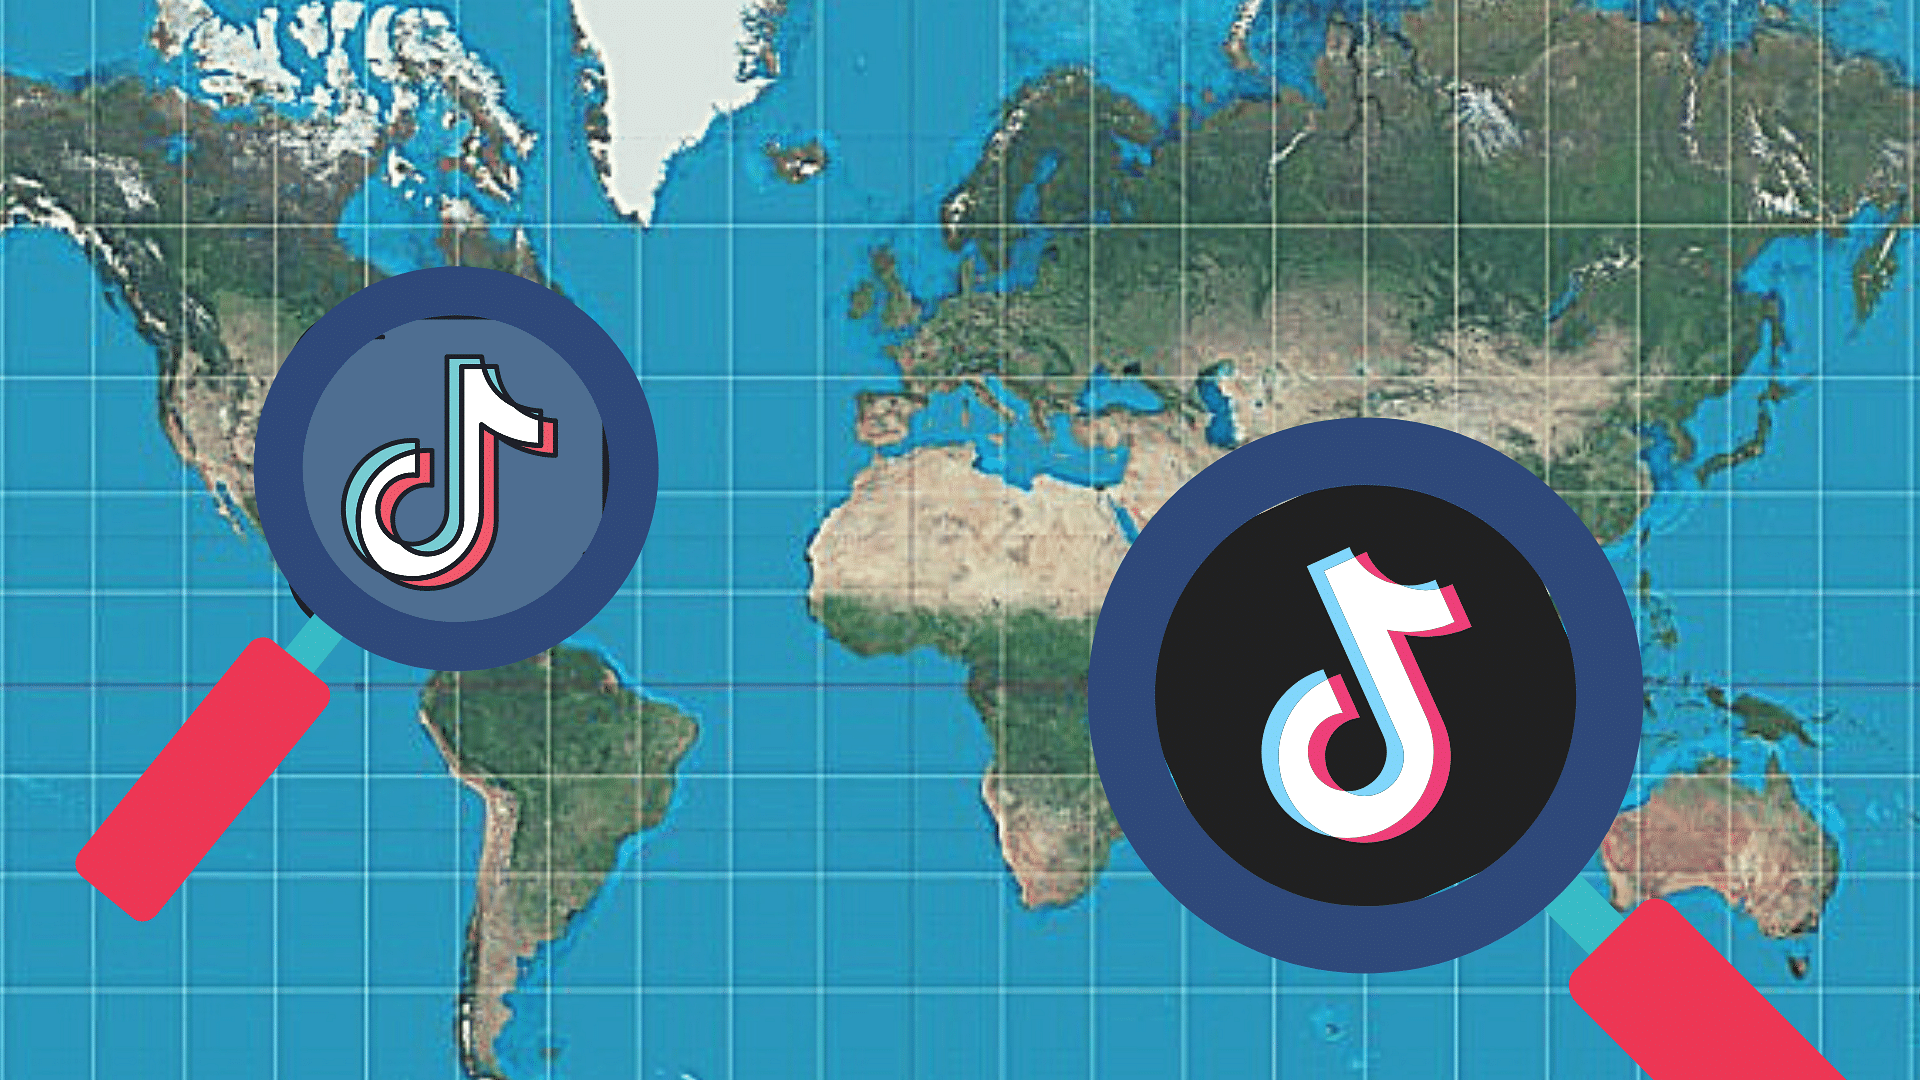 Apart from India, the United States, Australia and even Pakistan have taken a hard stance on TikTok amidst growing geopolitical machinations.